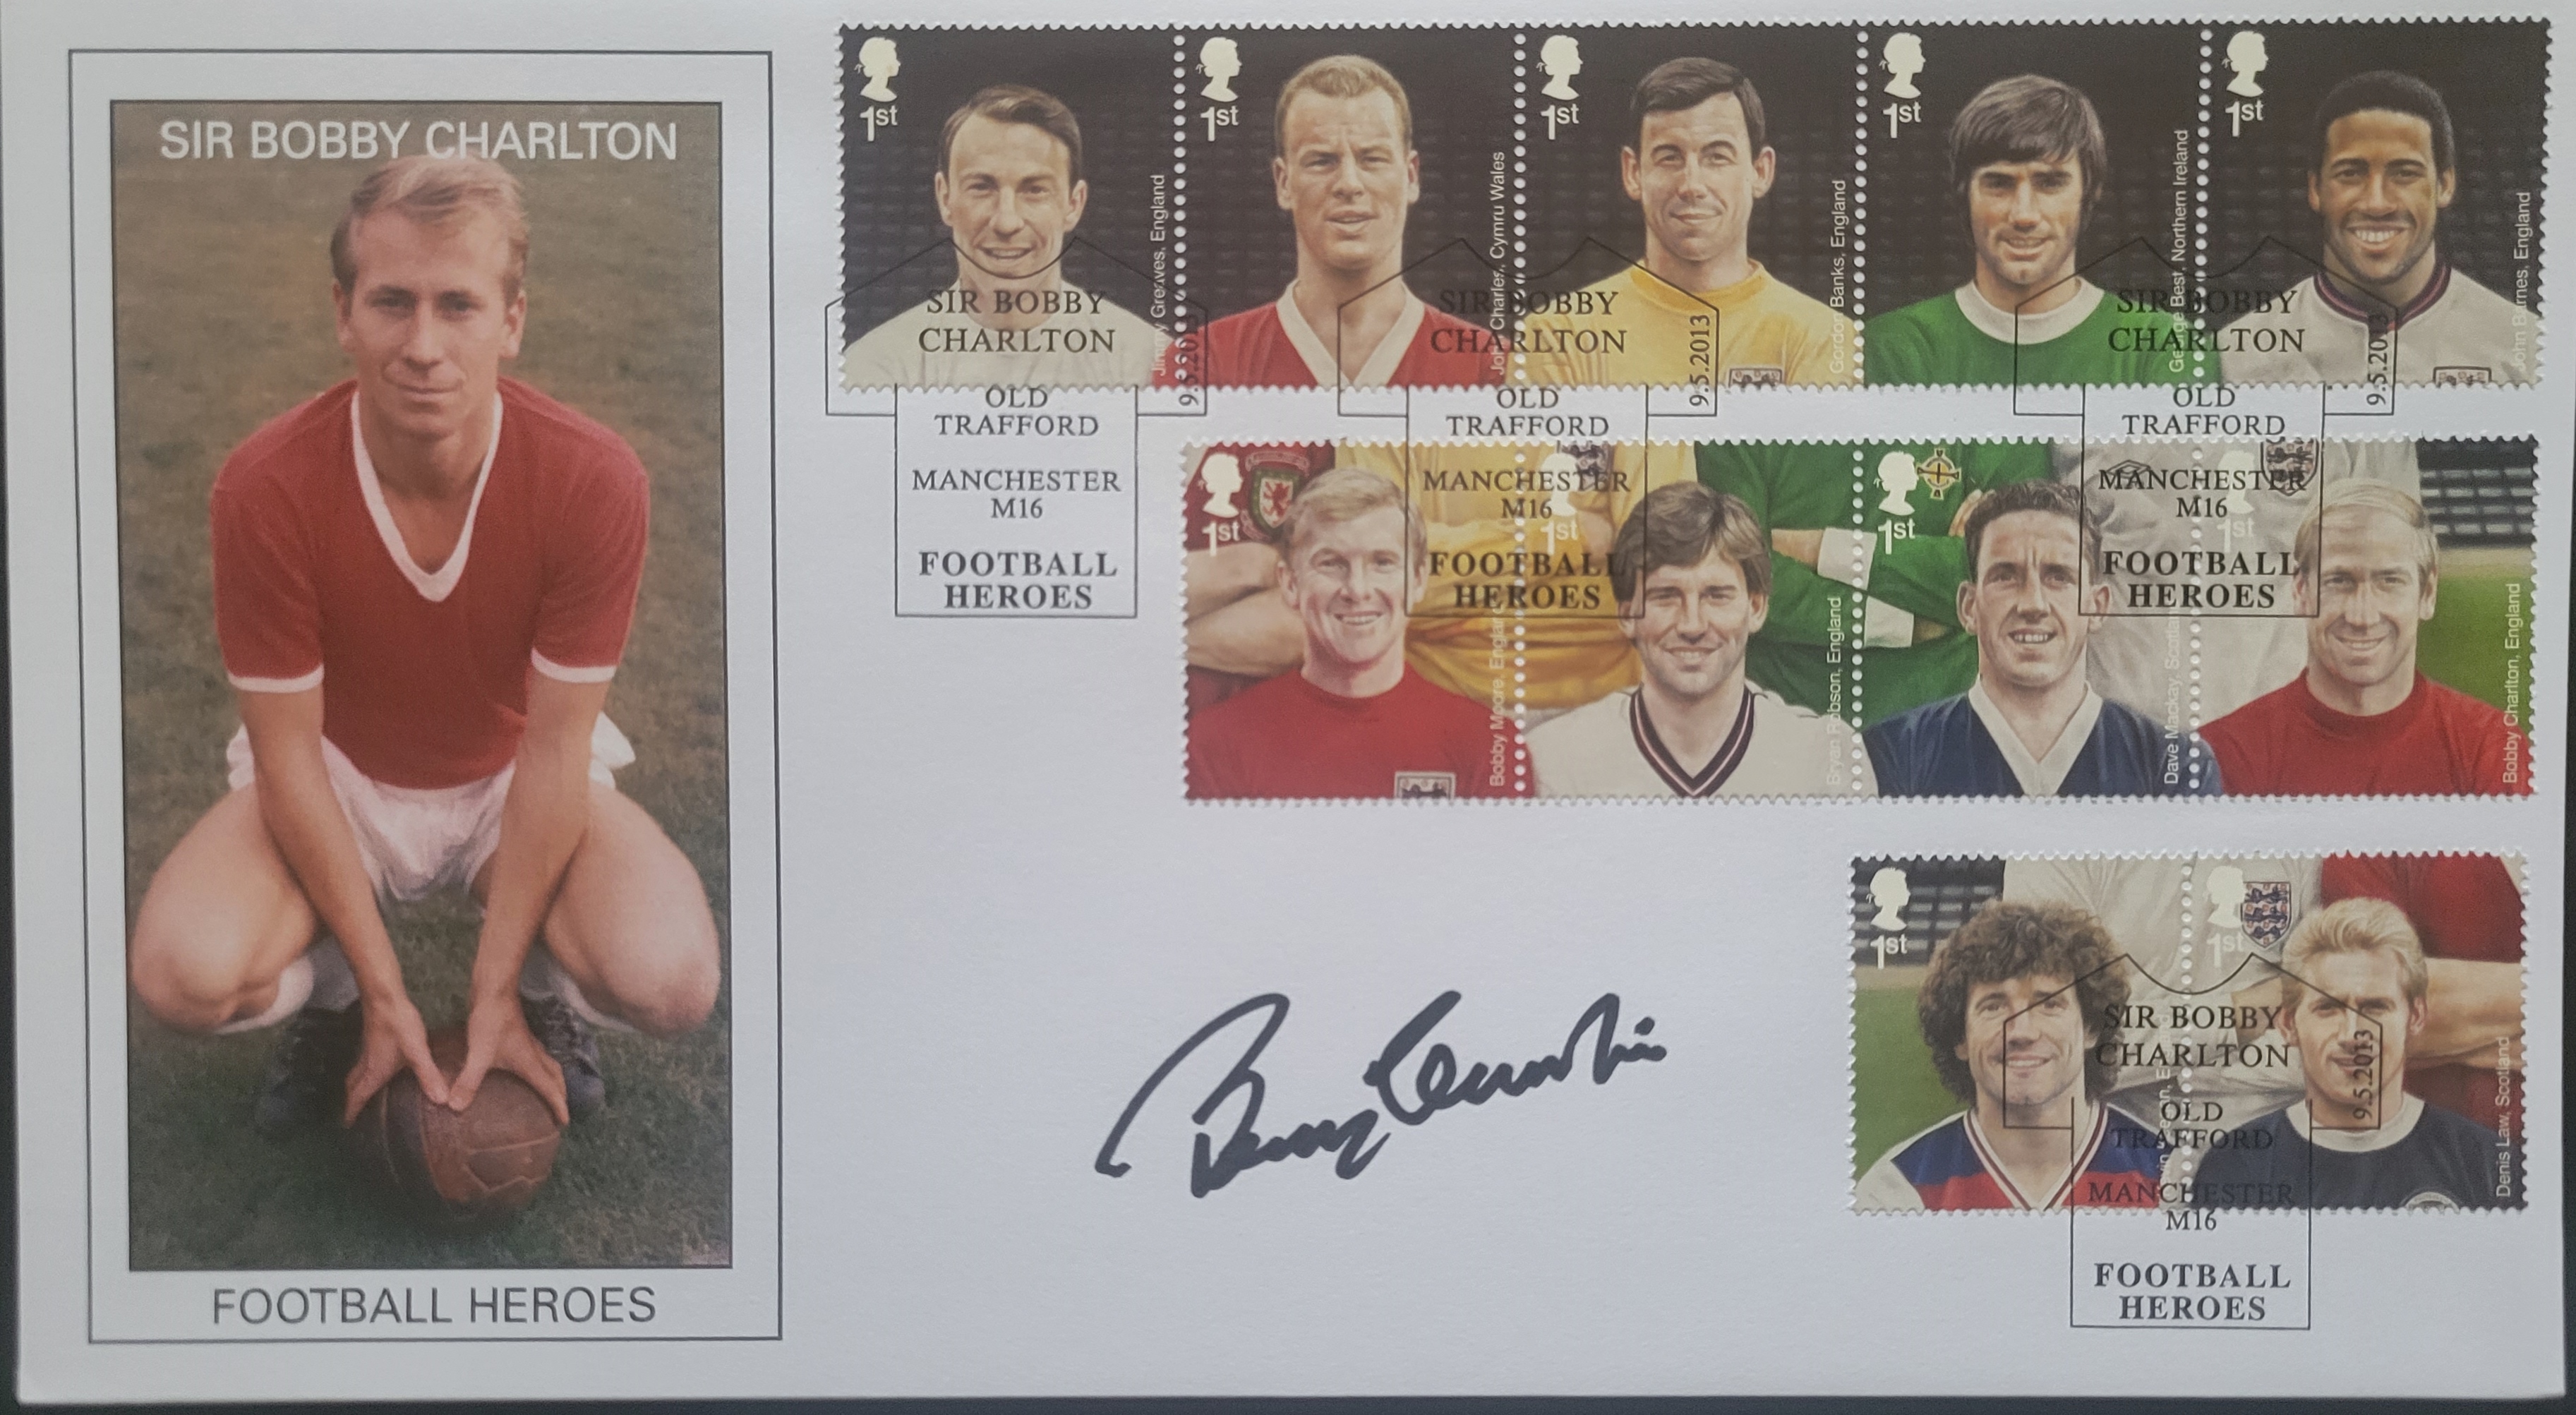 MANCHESTER UNITED BOBBY CHARLTON FOOTBALL HEROES AUTOGRAPHED POSTAL COVER